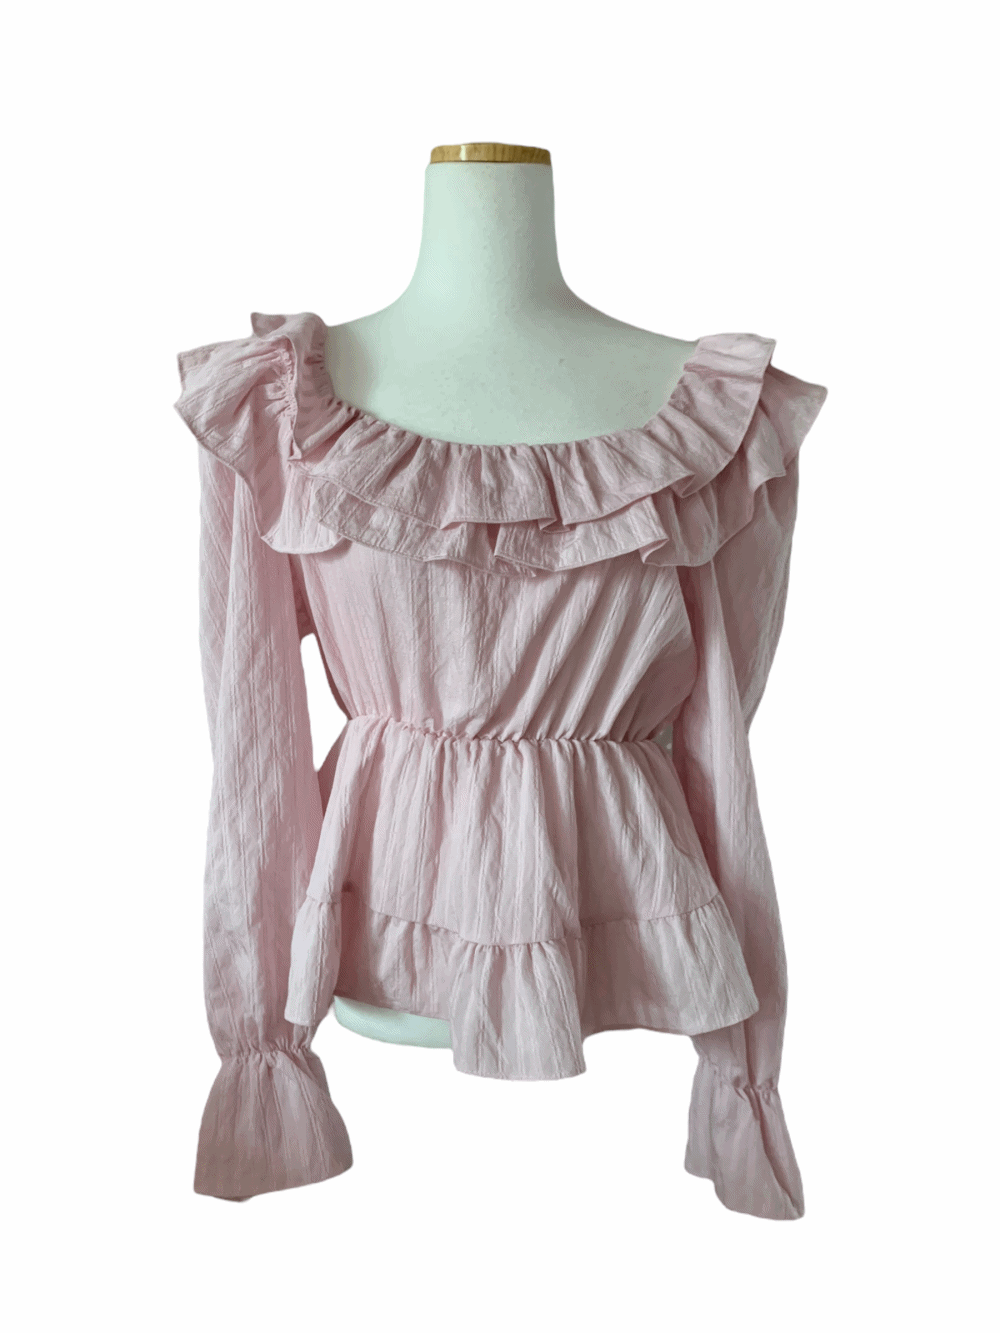 [PREMIUM] [Top] Amore Frill Ruffle Blouse / 3 colors